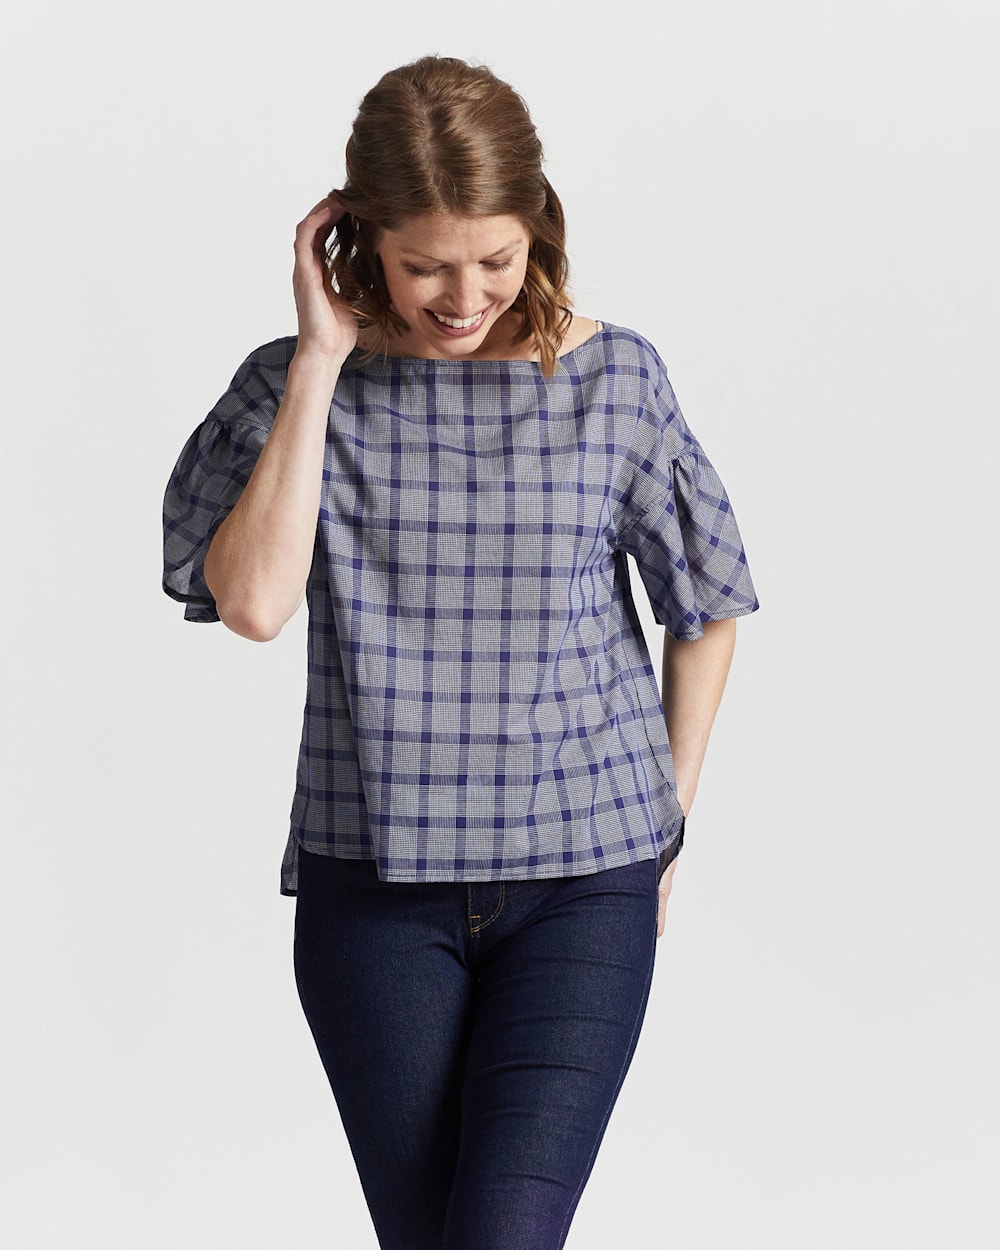 WOMEN'S AIRY SHORT-SLEEVE BOATNECK TOP IN NAVY/WHITE PLAID image number 1